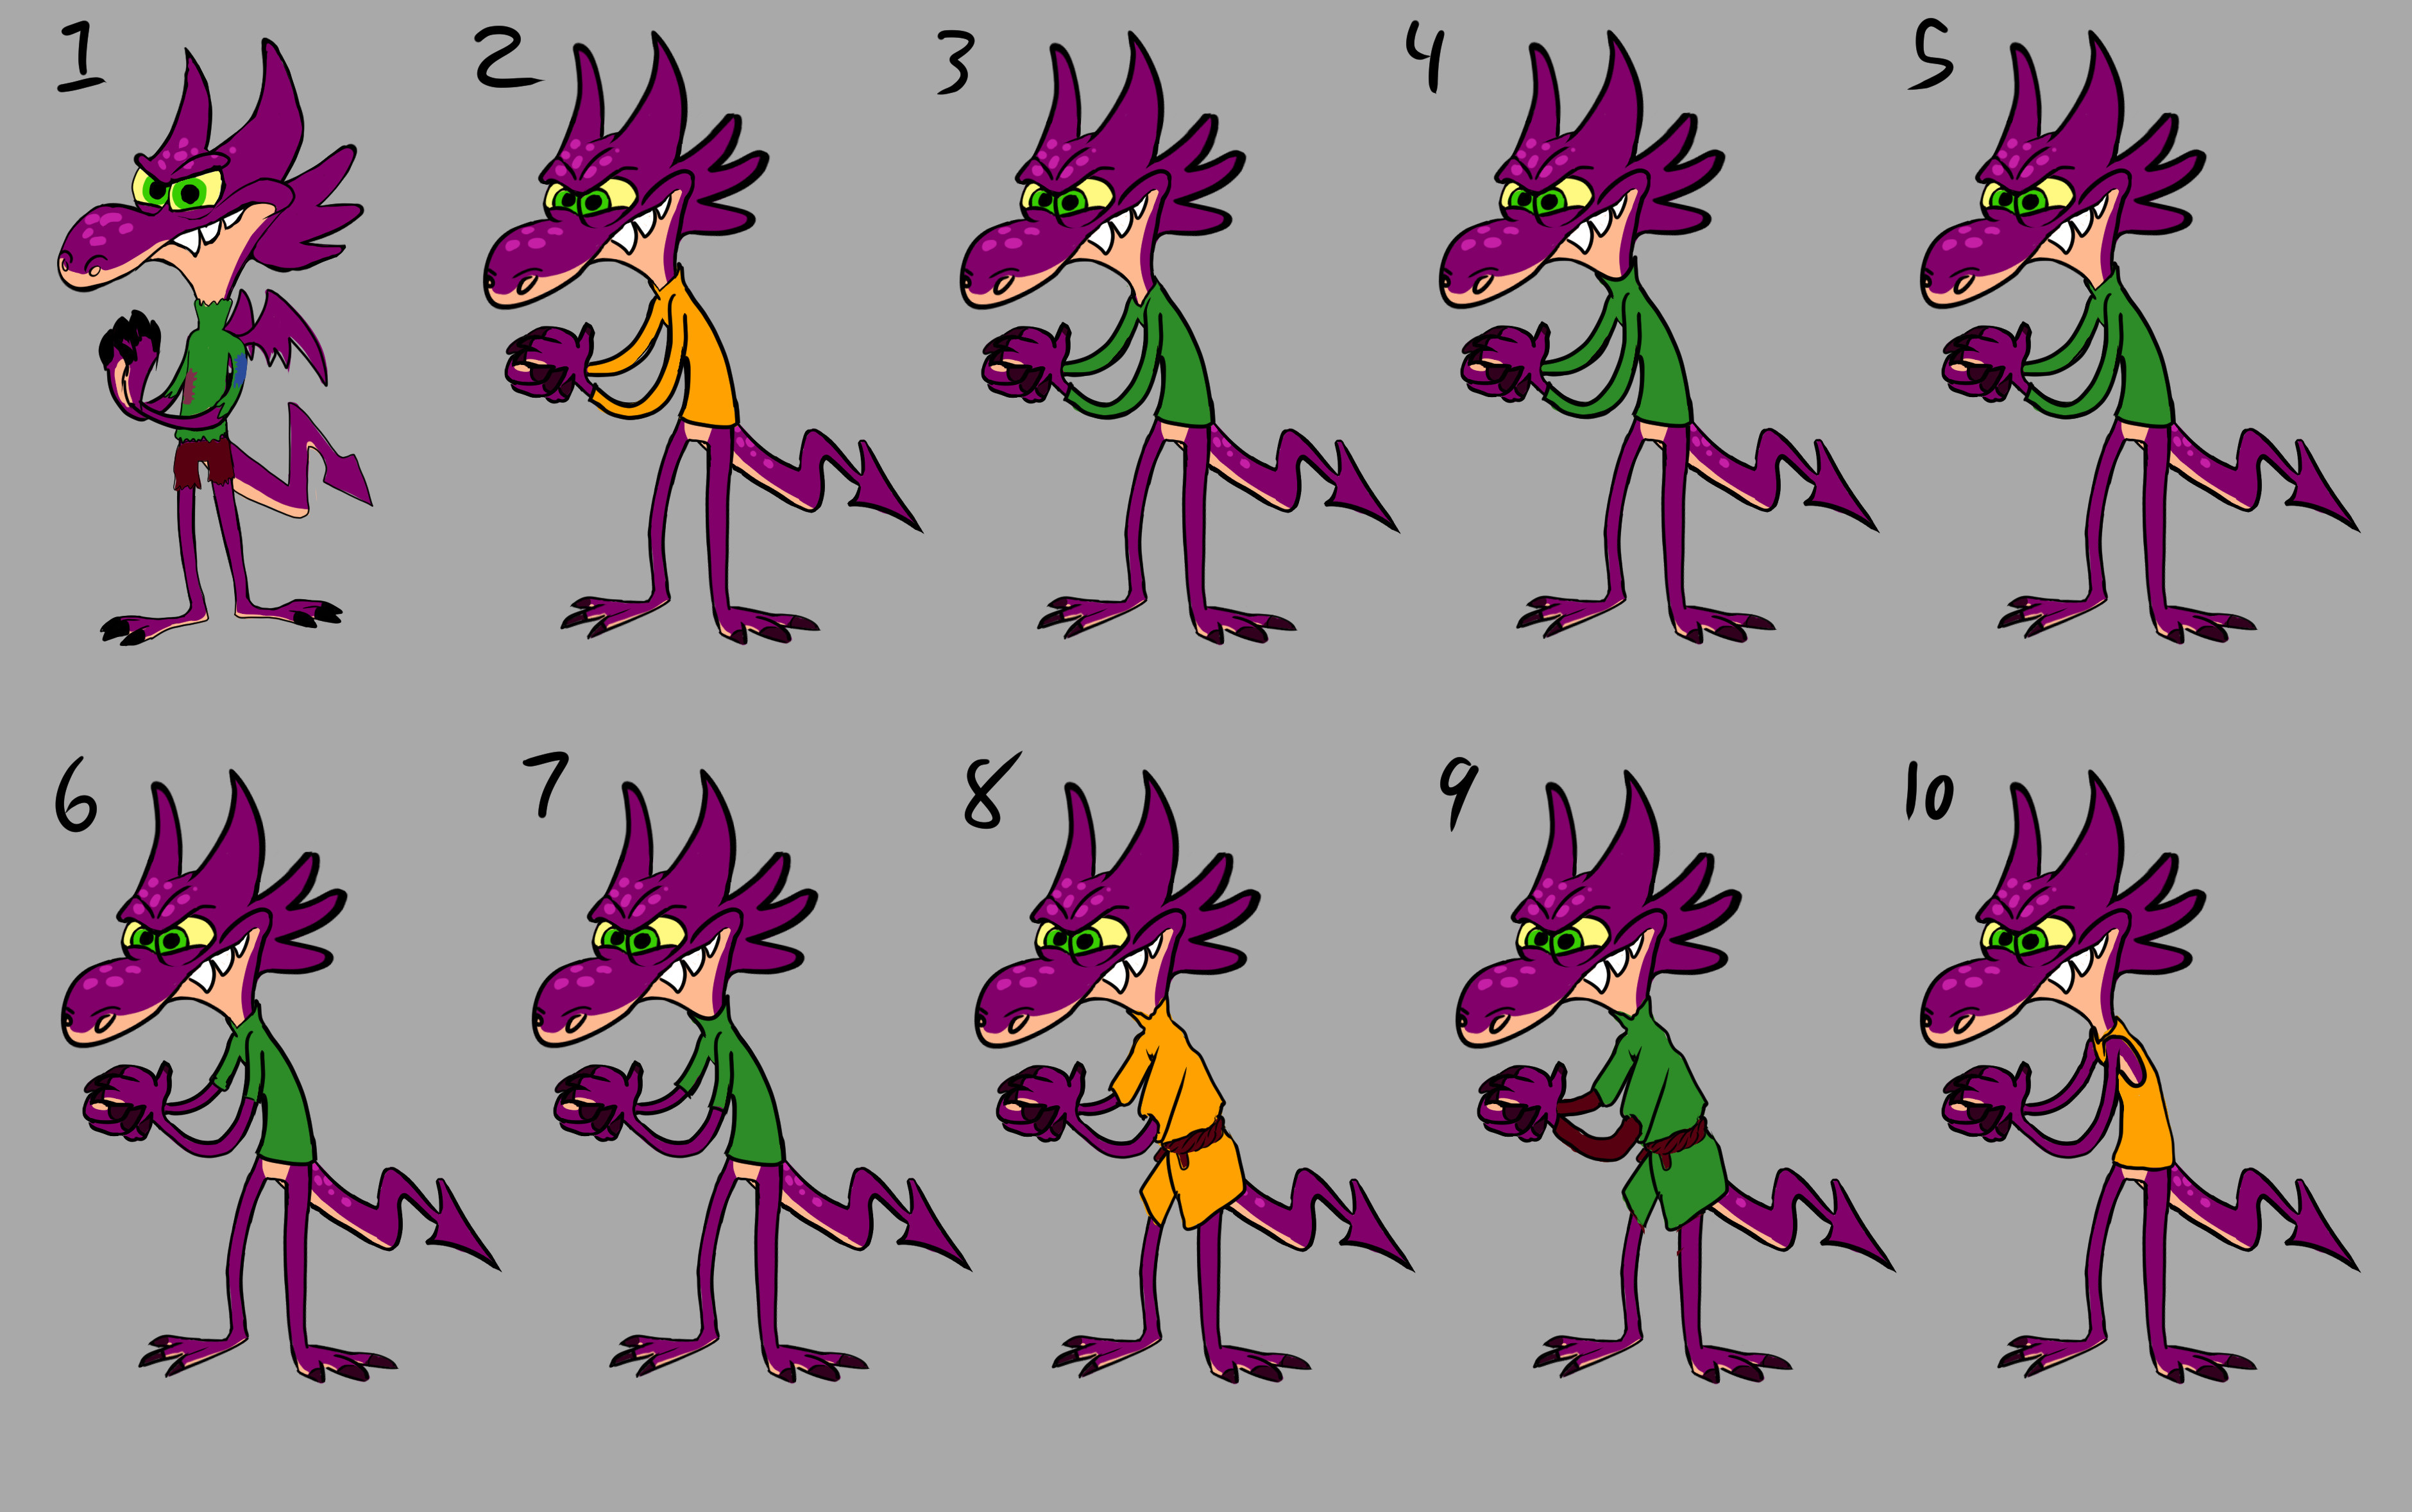 New dragon design with clothing exploration